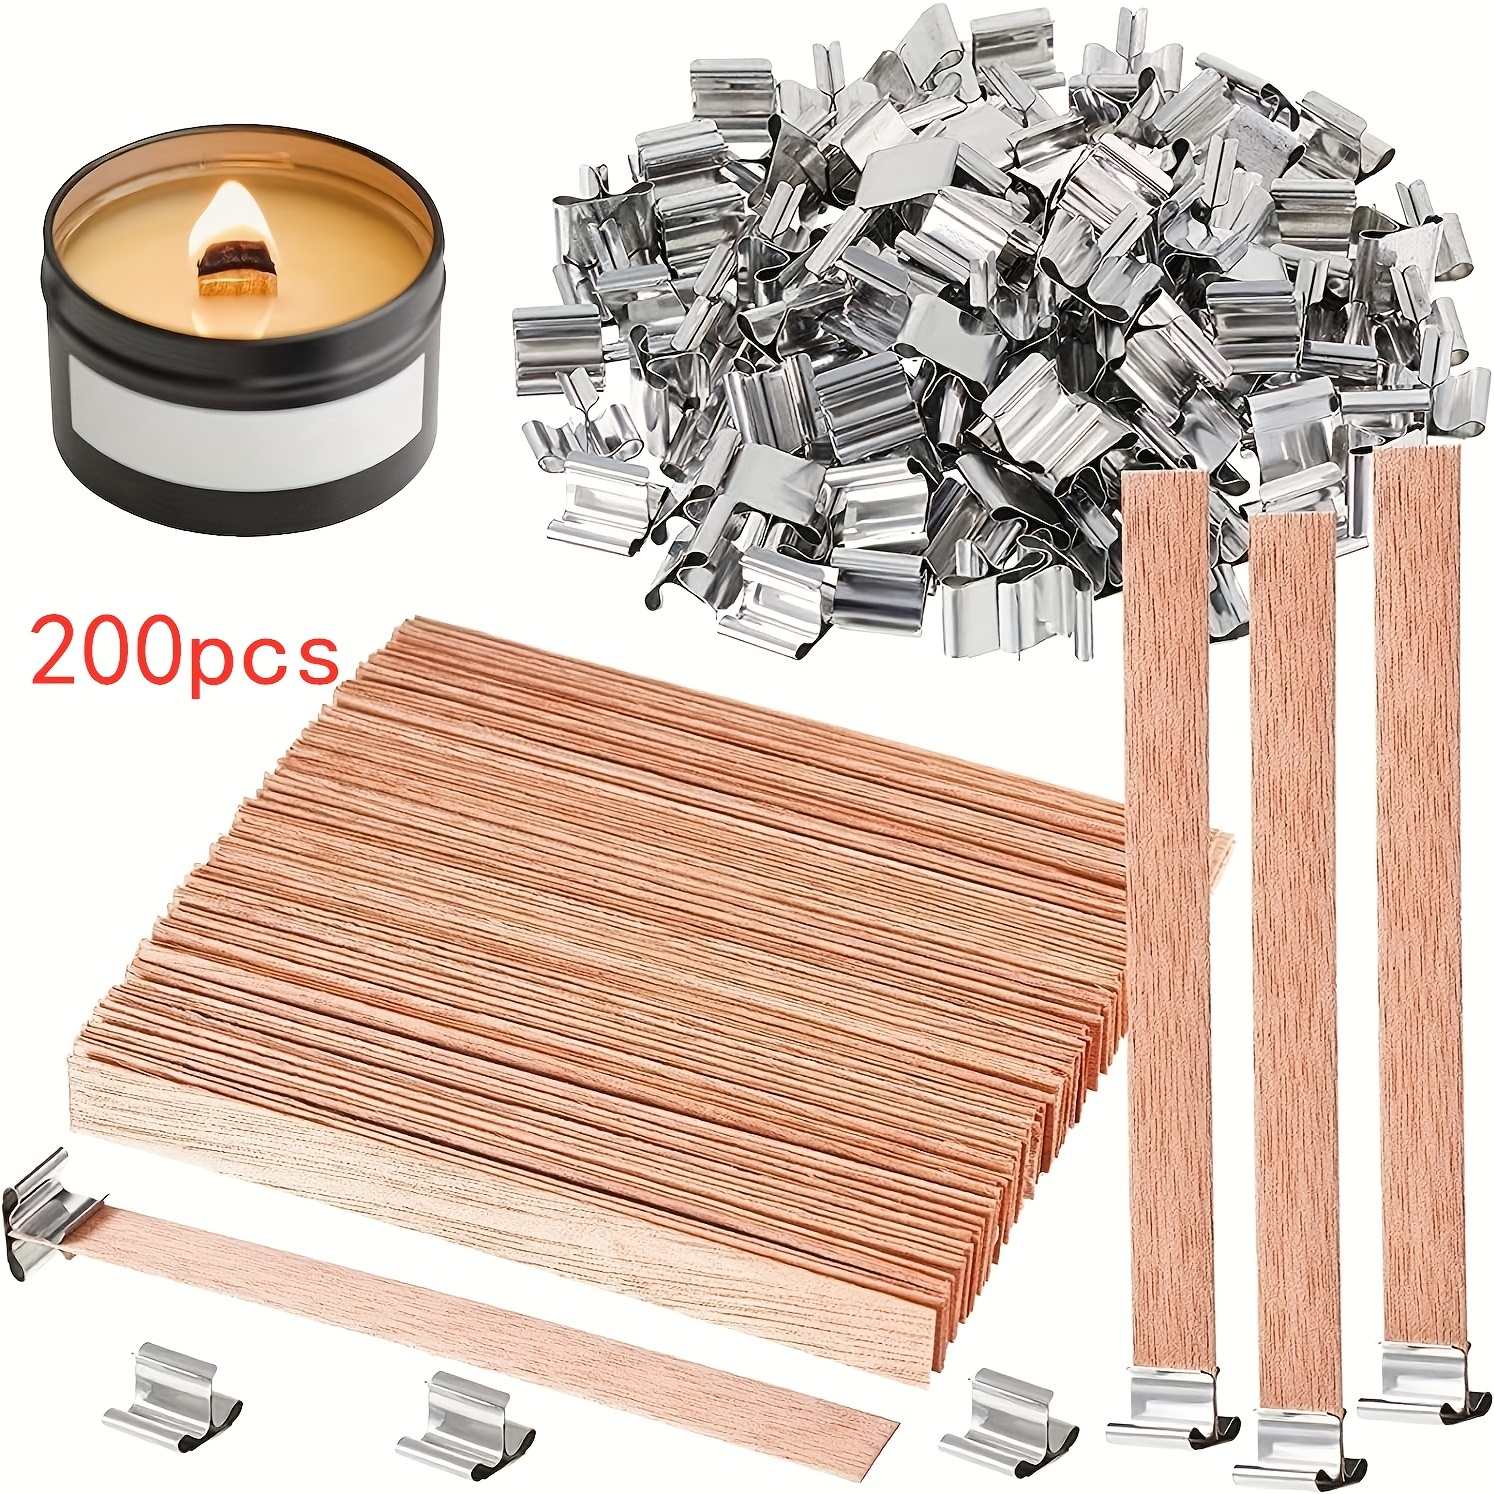 Ziosxin 100pcs Smokeless Cherry Wood Candle Wicks-Long Lasting Flame-Easily  Burn, Natural Candle Cores with Stand and Glue Dot, Warning Label  (W:13cm/5.1,H:2.5cm/1,D:0.5mm/0.019)